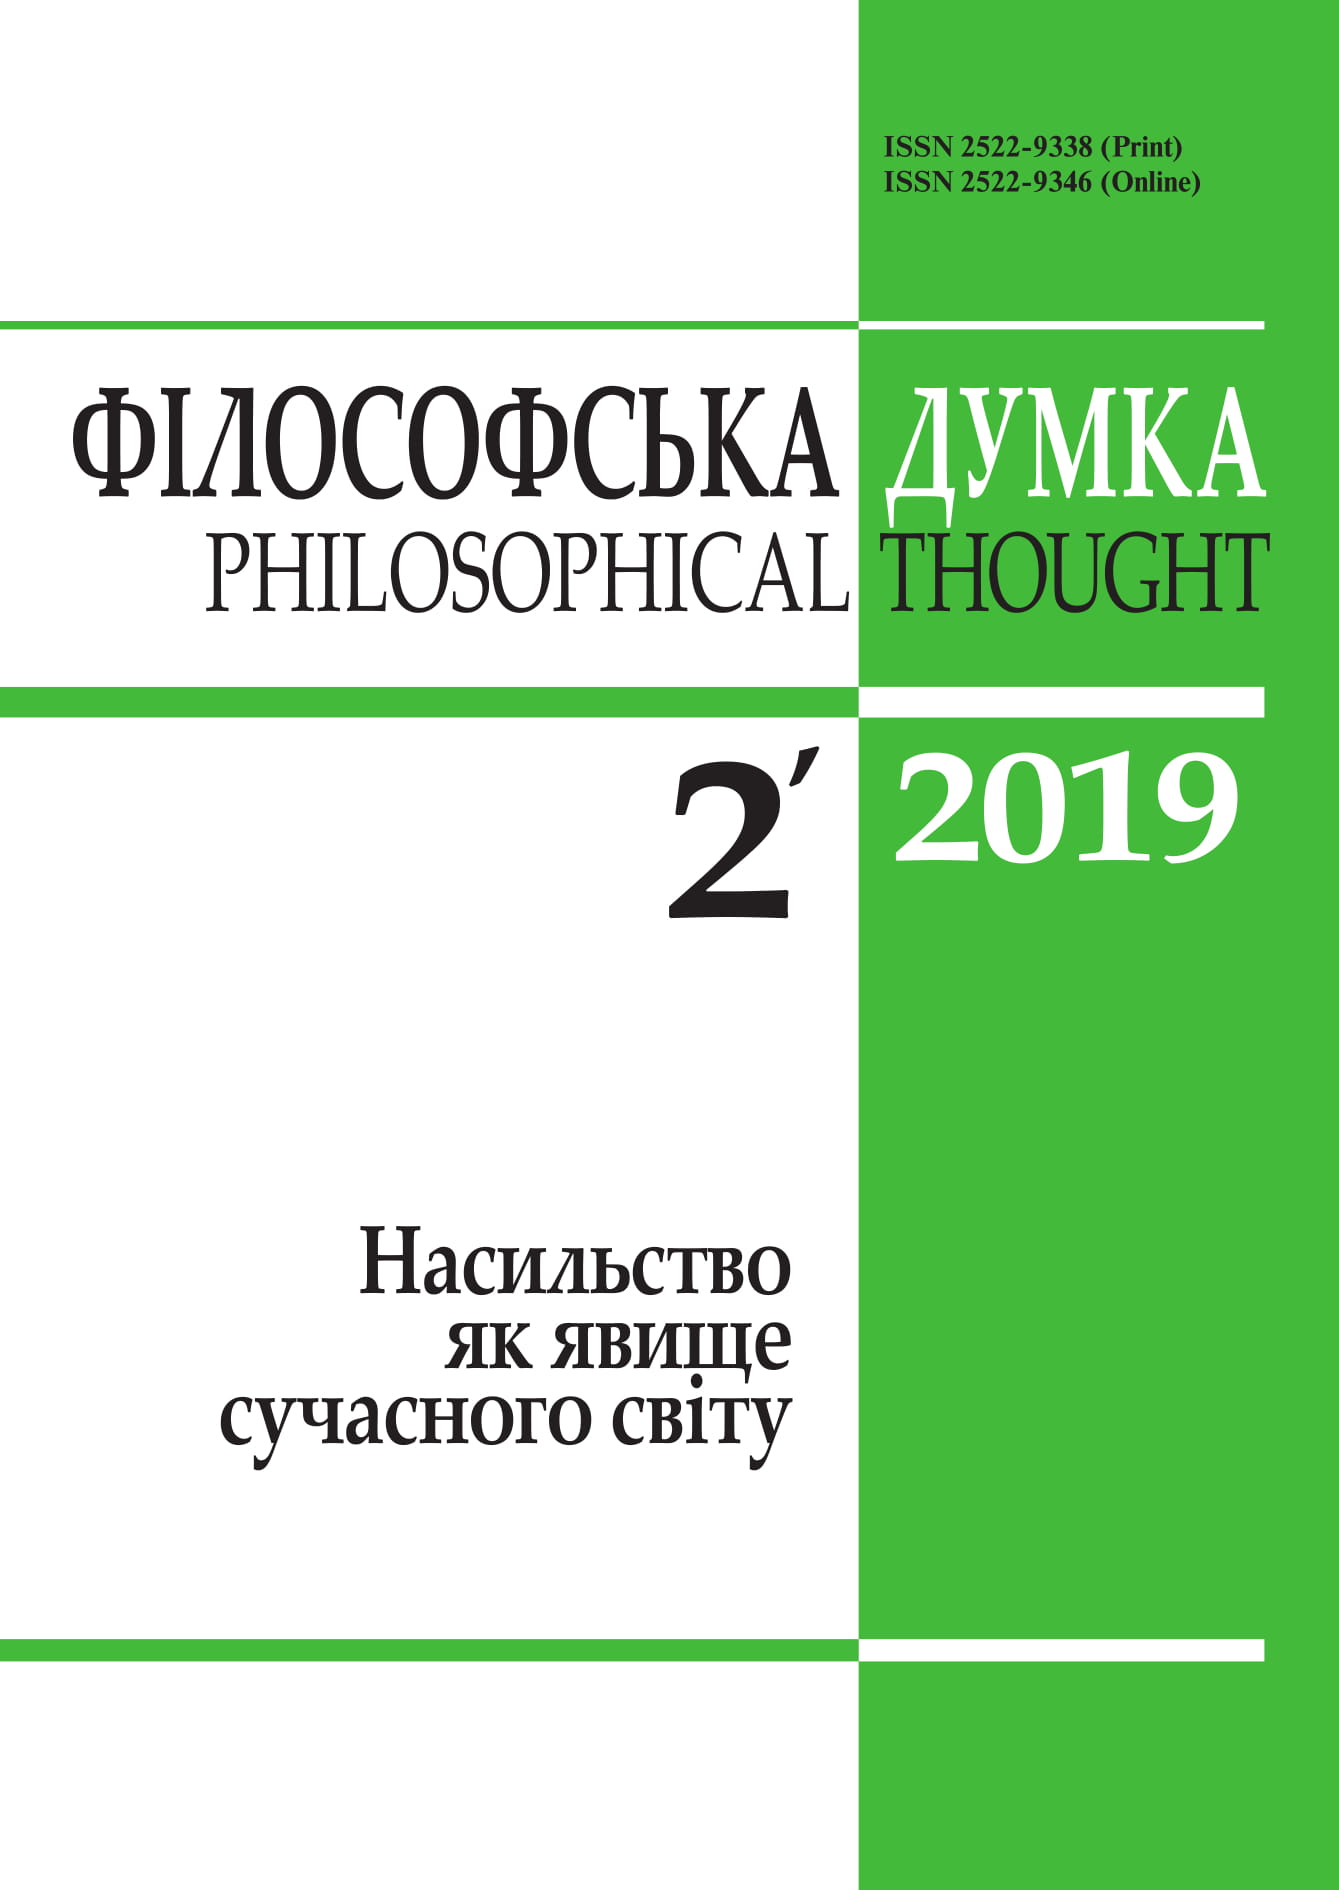 					View No. 2 (2019): Philosophical thought
				